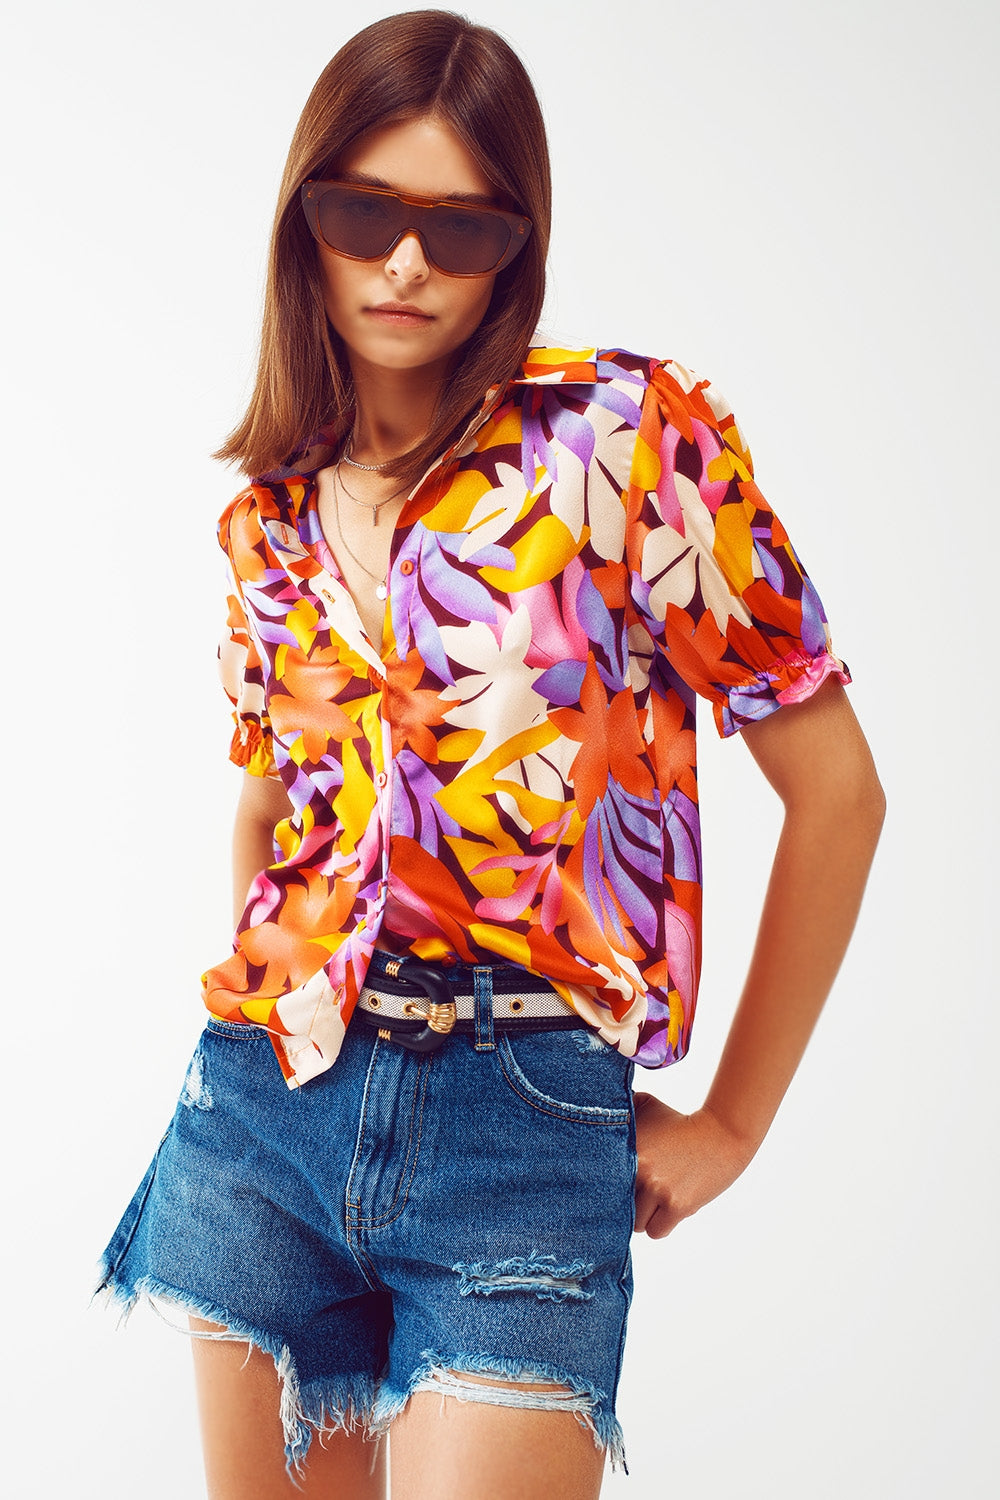 Q2 Floral print shirt with elasticated sleeves in multi colour